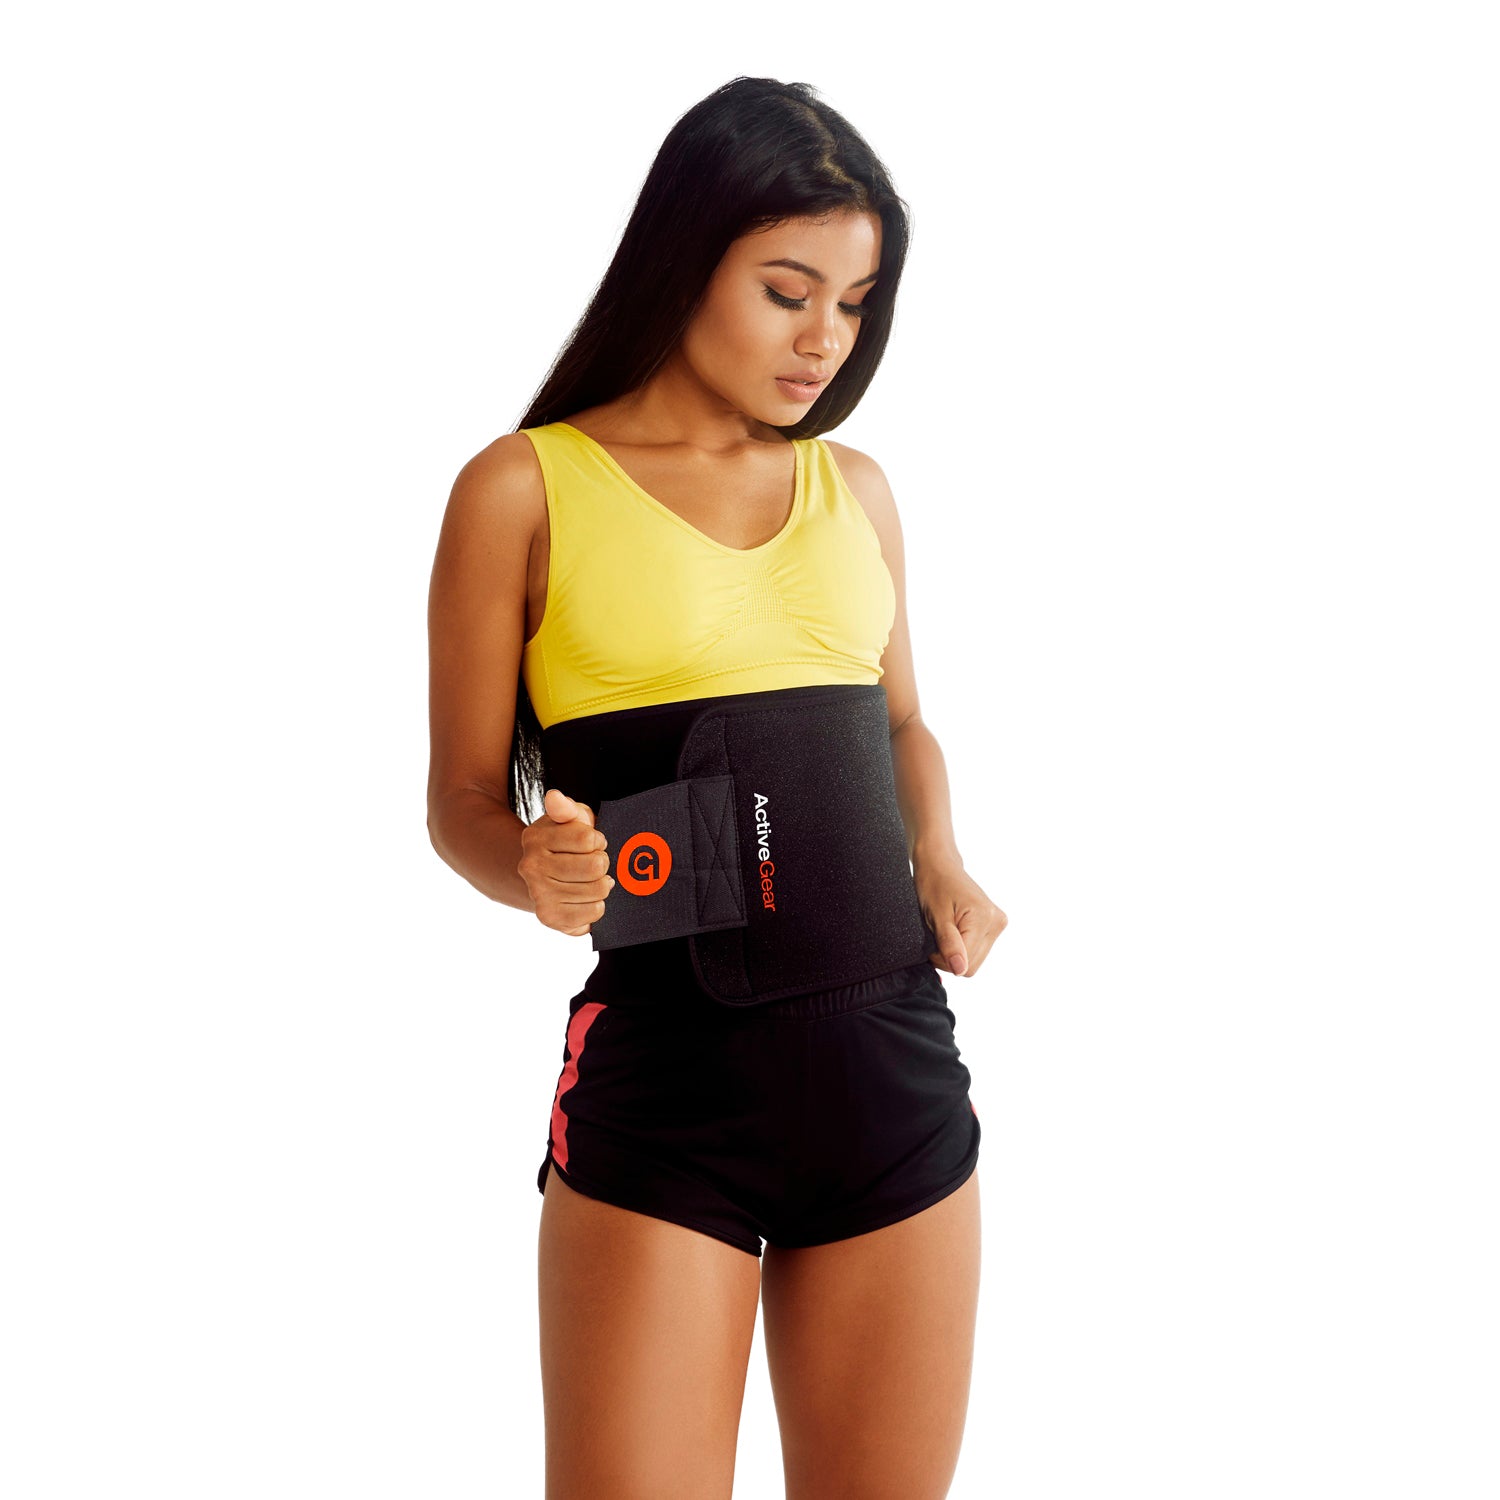 ACTIVE GEAR Waist Trimmer Belt For Stomach And Back Lumbar Support